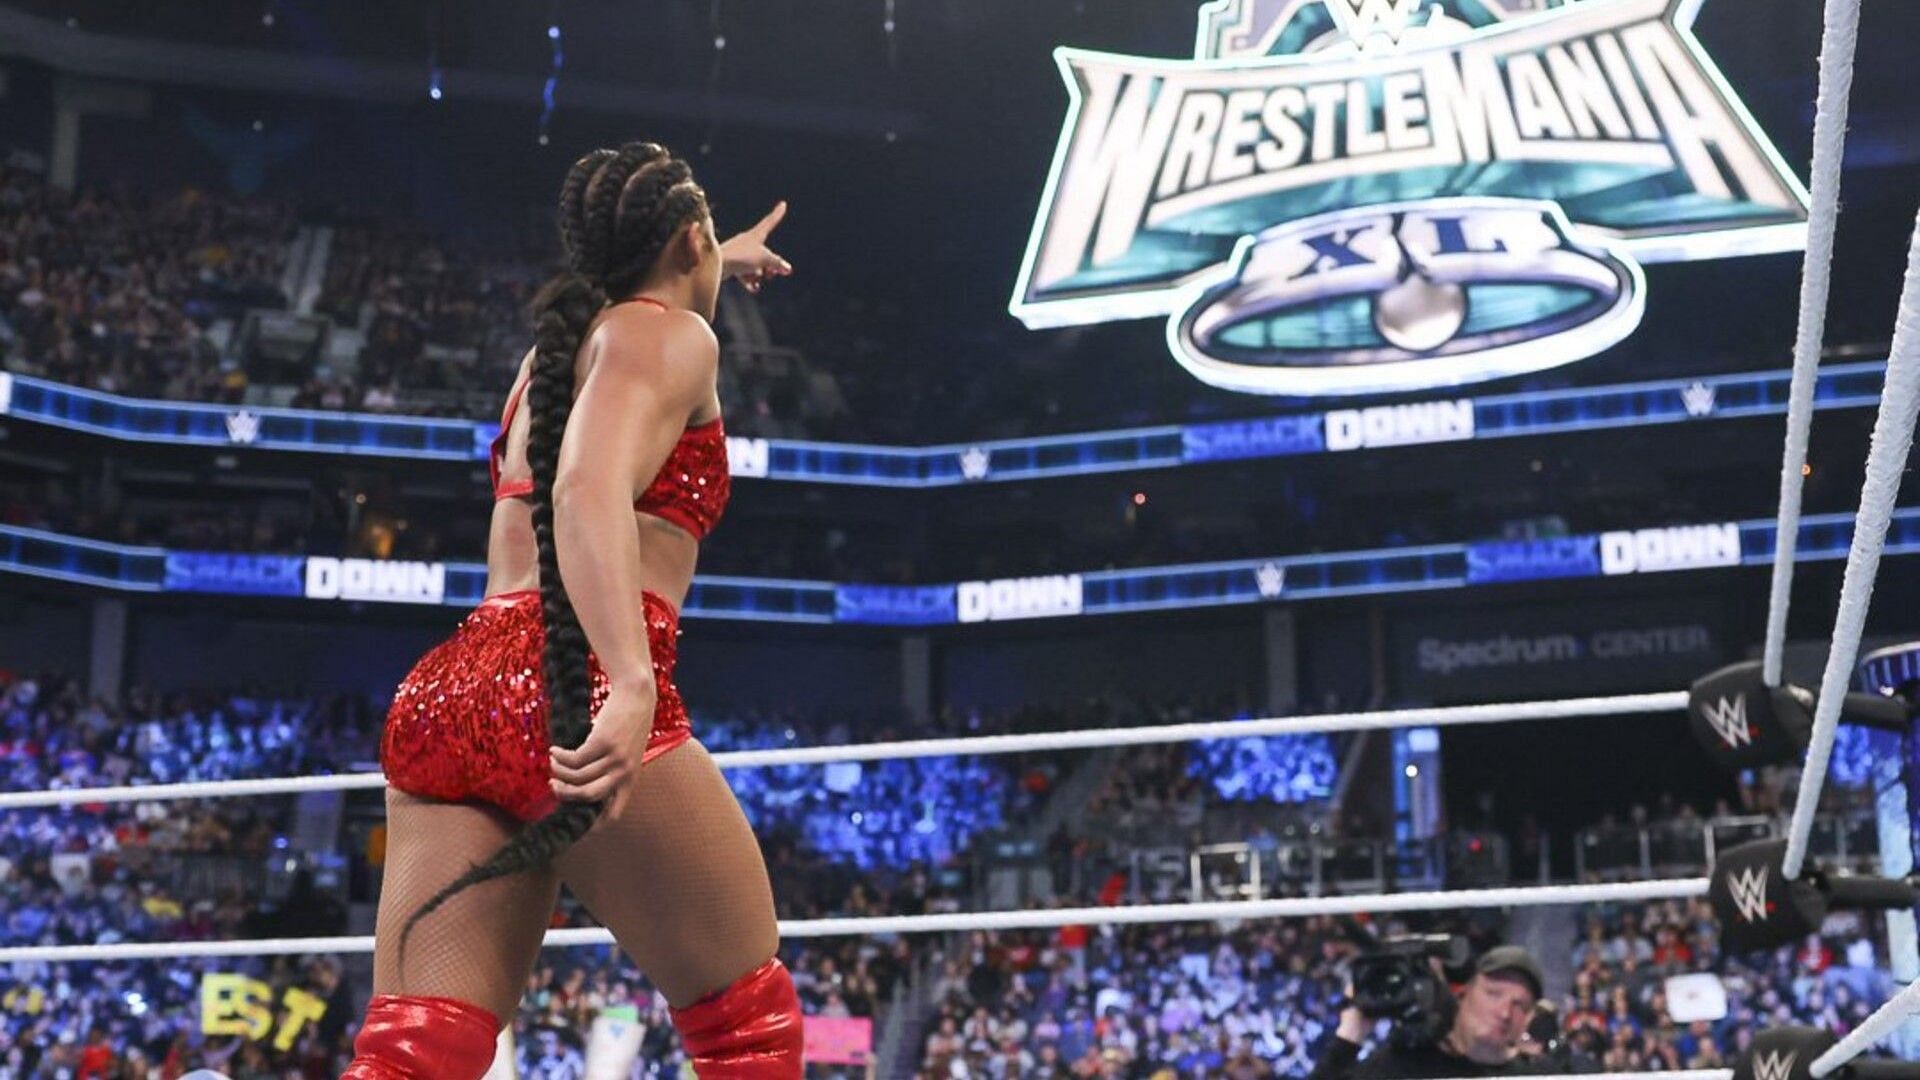 Bianca Belair points to the WrestleMania XL sign on WWE SmackDown